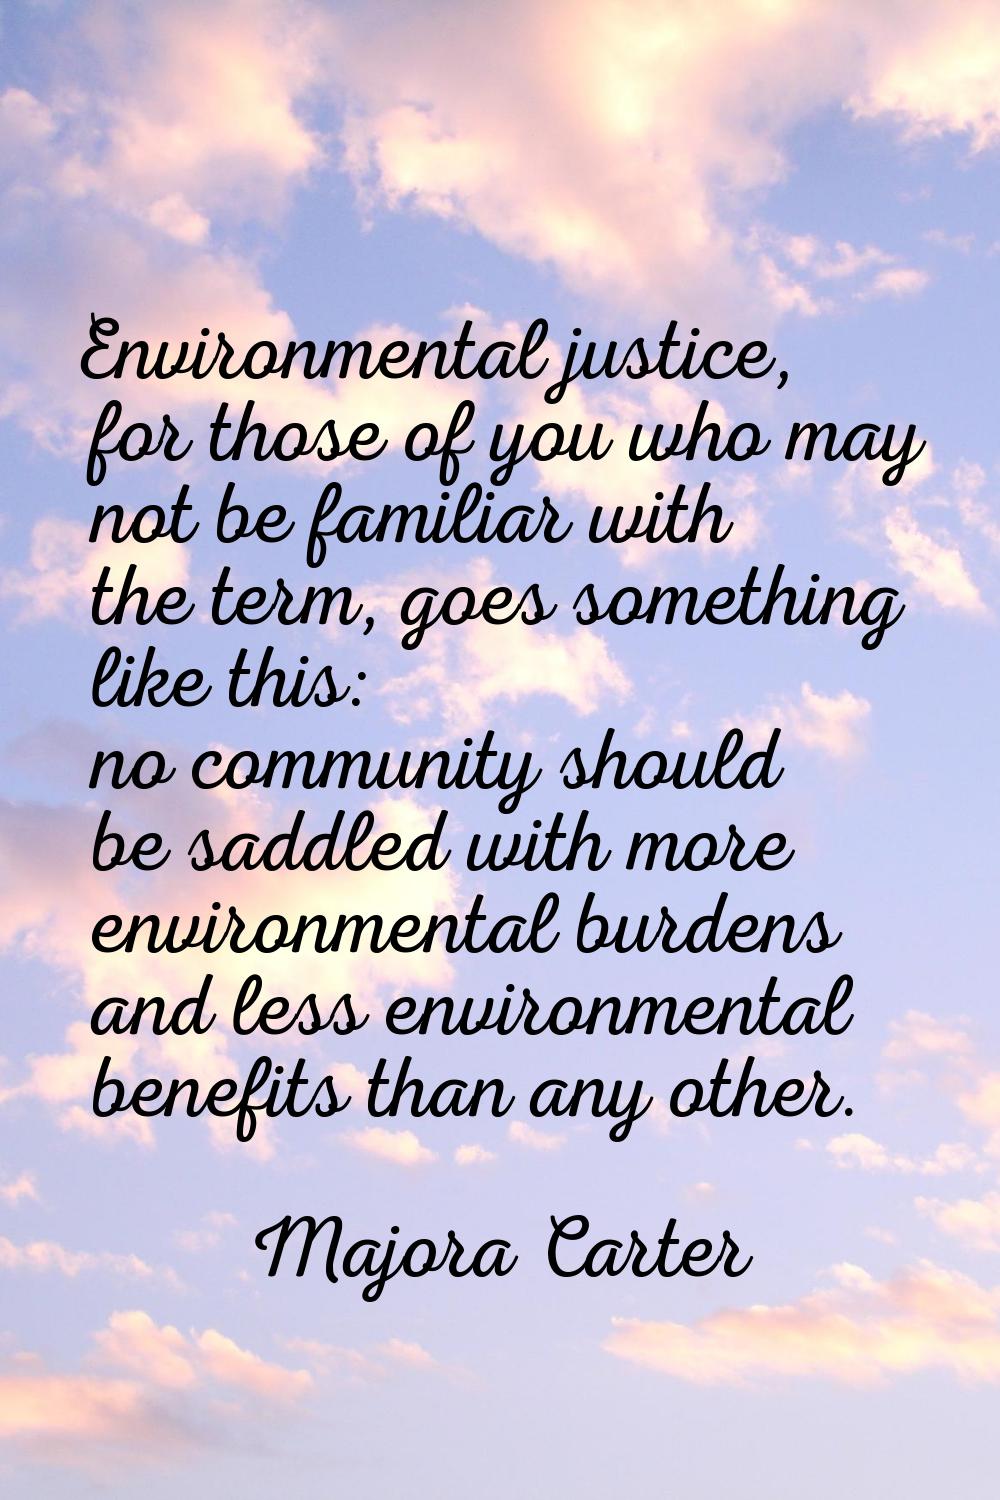 Environmental justice, for those of you who may not be familiar with the term, goes something like 